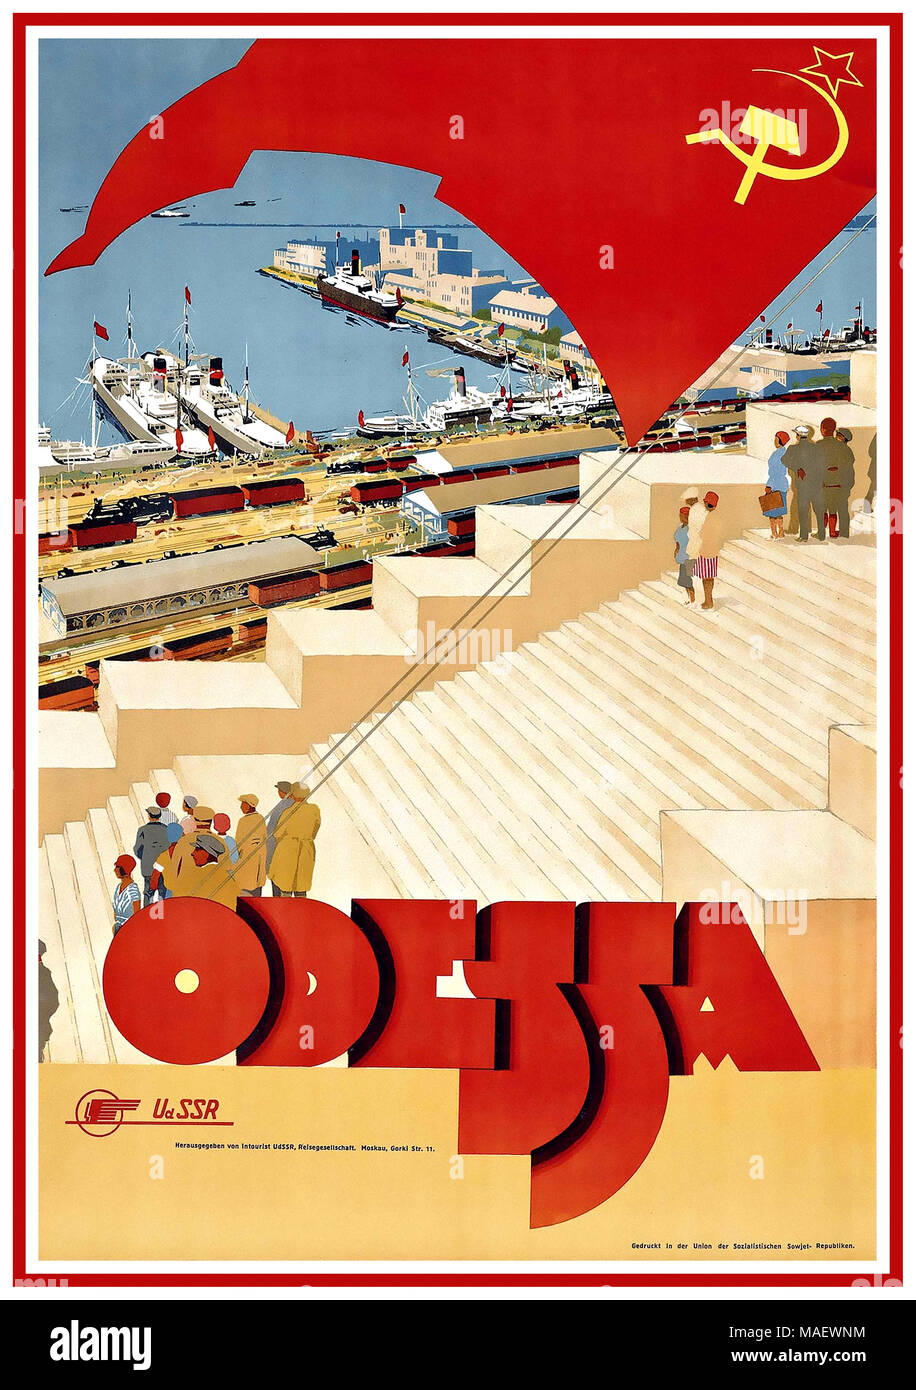 ODESSA 1930's Vintage UKRAINE Russian RUSSIA Travel Poster Odessa USSR Soviet Union An early Soviet Intourist poster, combining  realistic landscape of Odessa port and rail yards, with stylized typography. The Odessa Steps, which gained world notoriety after the famous scene in Sergei Eisentstein's movie Battleship Potemkin, were constructed between 1837 and 1841. Linking the famous seaport with the city itself, the steps are Odessa's most notable landmarks. Stock Photo